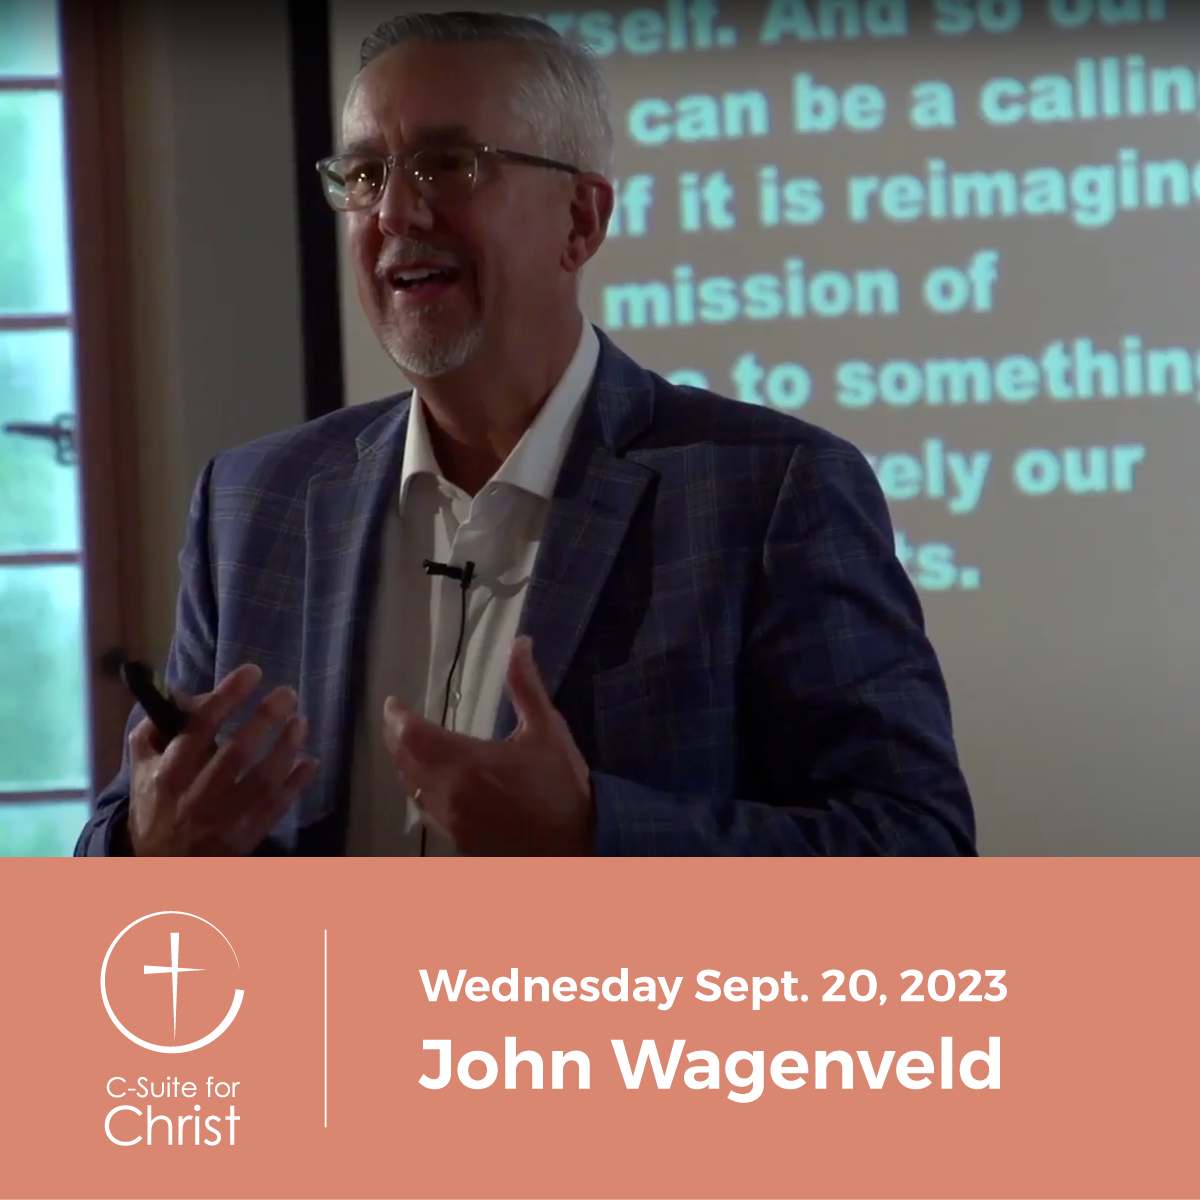 C-Suite for Christ | Wednesday September 20, 2023 Chapter meeting with John Wagenveld